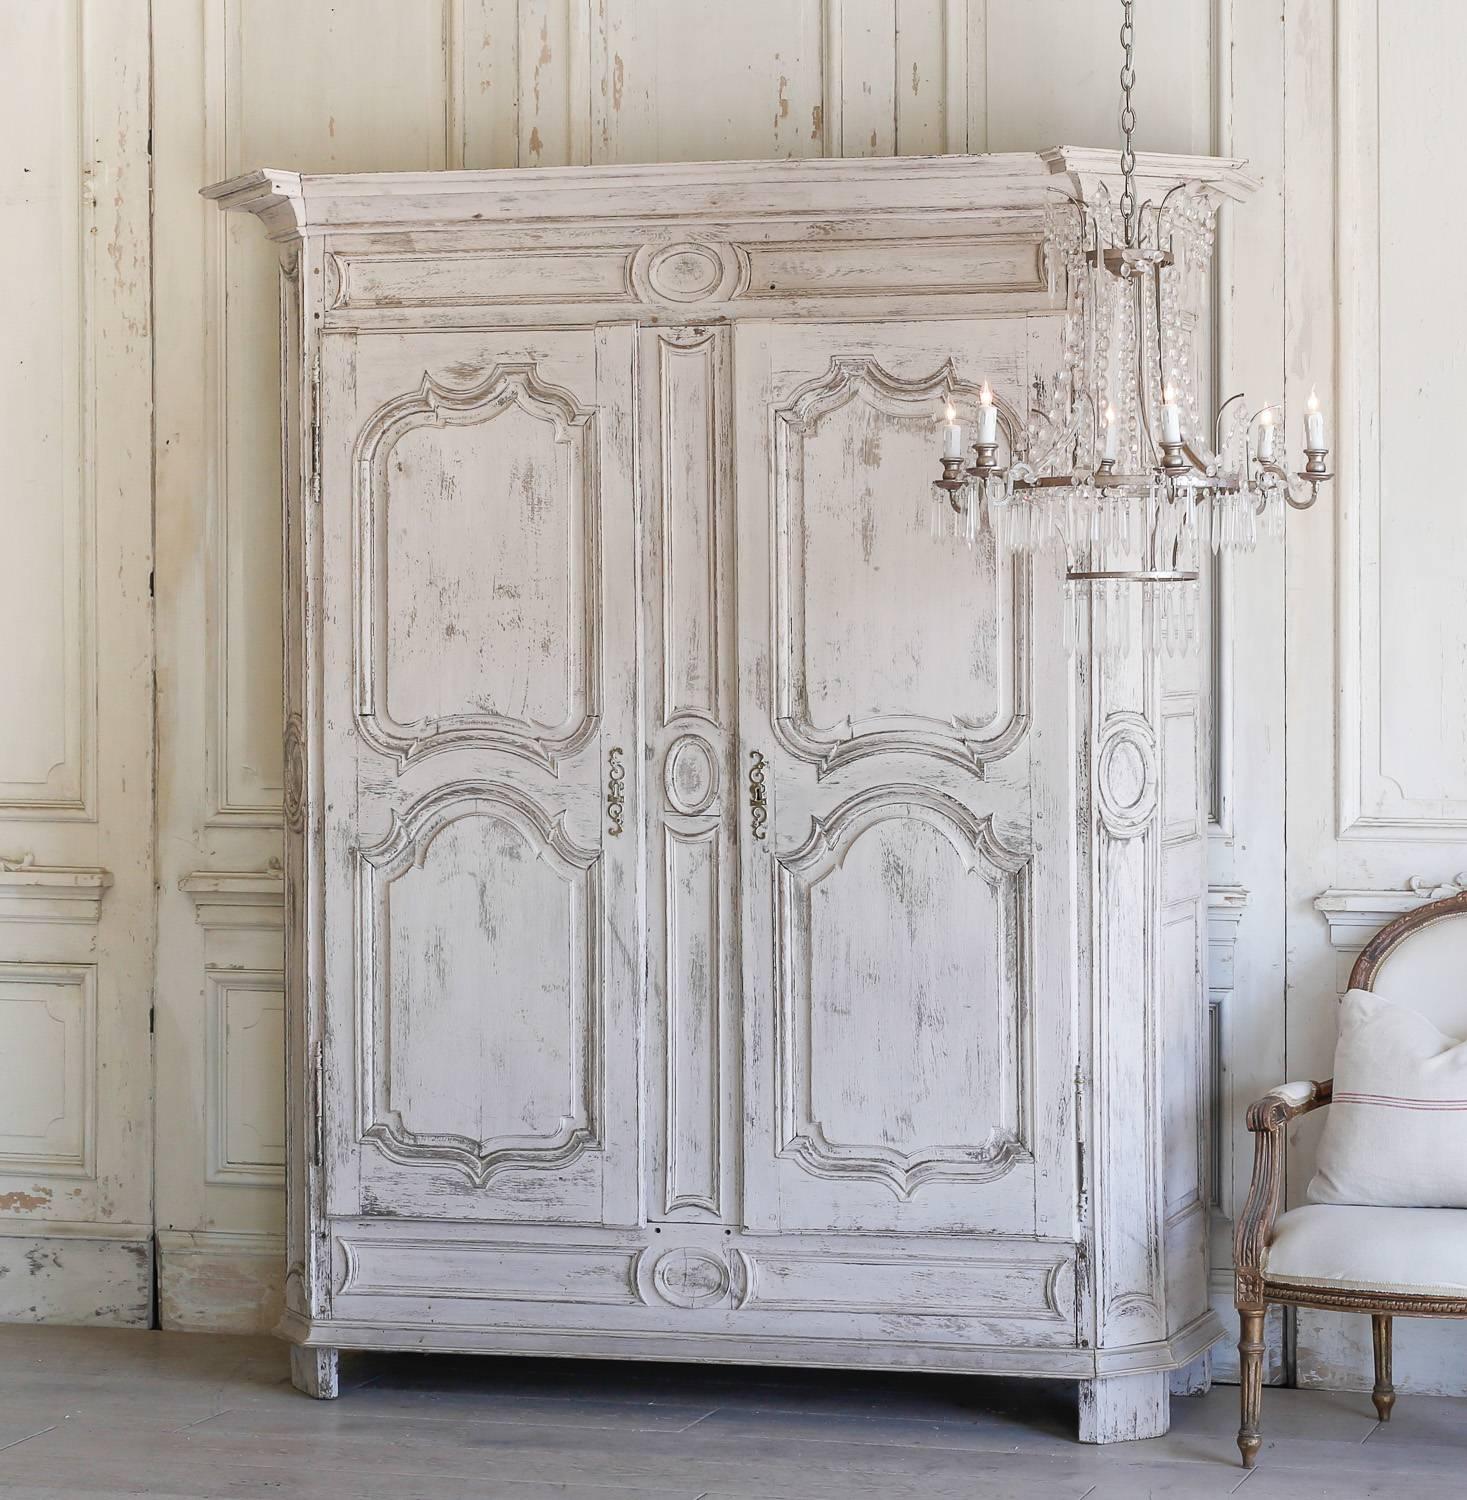 Antique armoire in a distressed, white blush color. This farmhouse-style armoire has four shelves measuring 24 inches deep. Clean medallion carvings decorate the unique exterior adding country charm to a bedroom or hallway.